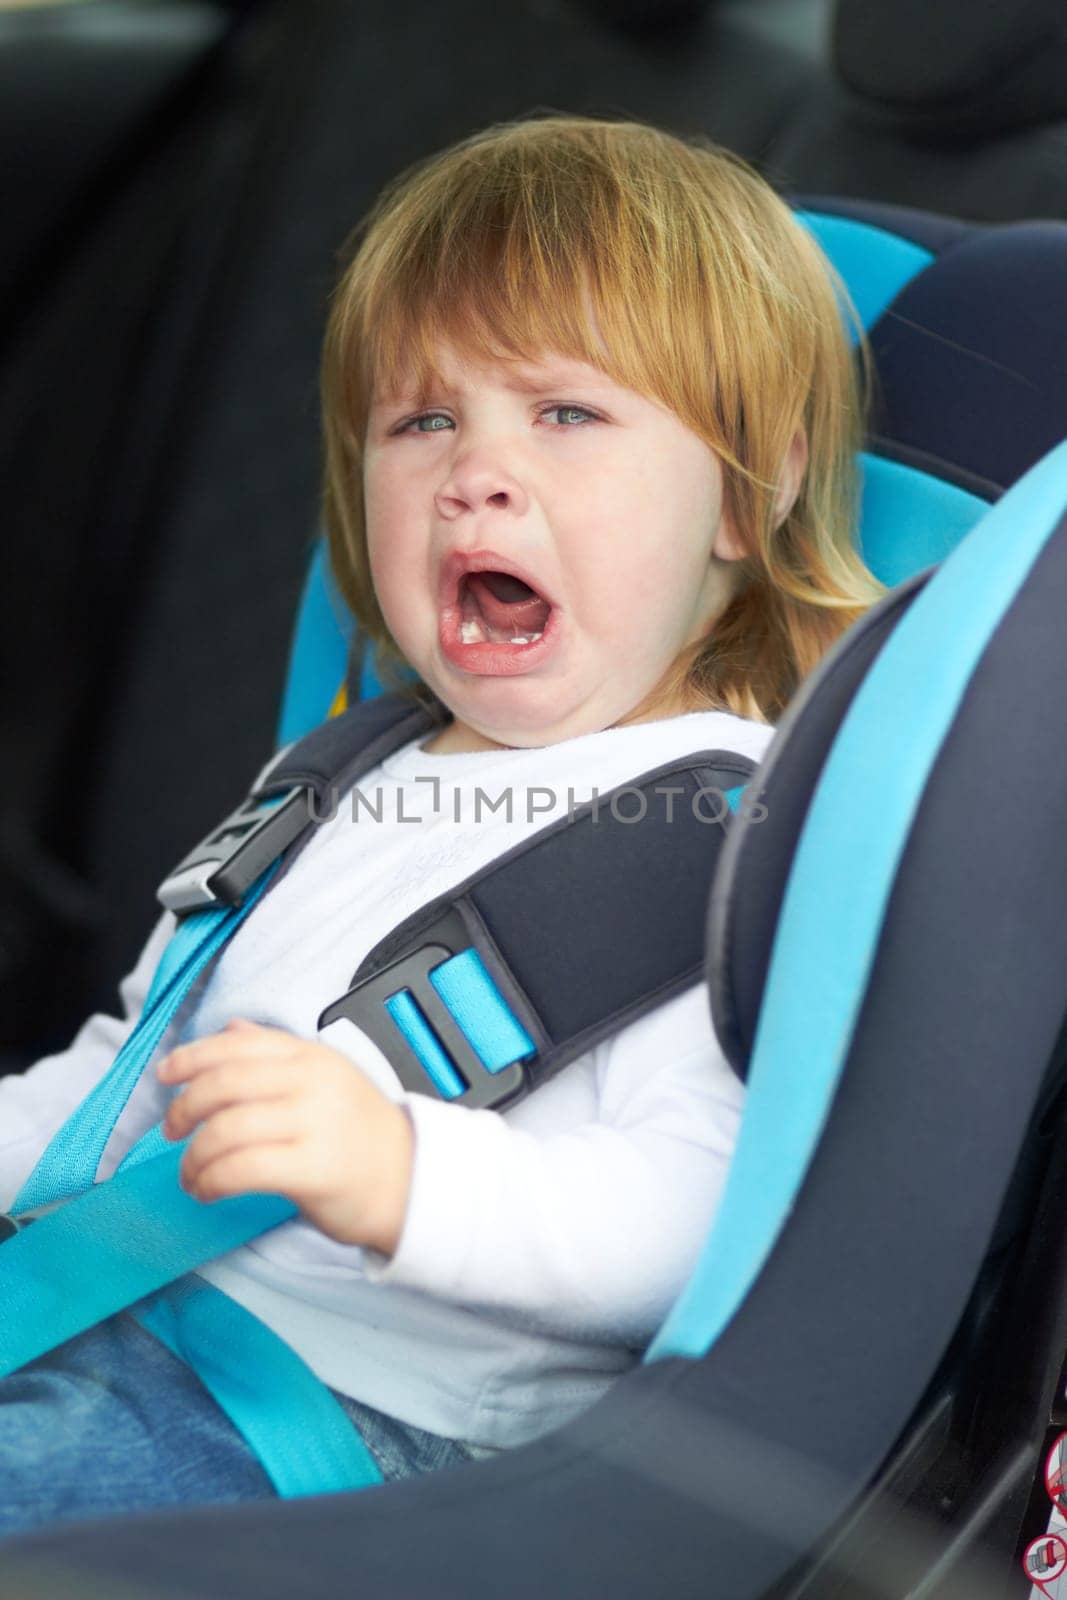 Sad, crying and portrait of baby in car seat for fear, uncomfortable and travel safety. Security, transportation and journey with upset toddler for vacation trip, frustrated and protection.